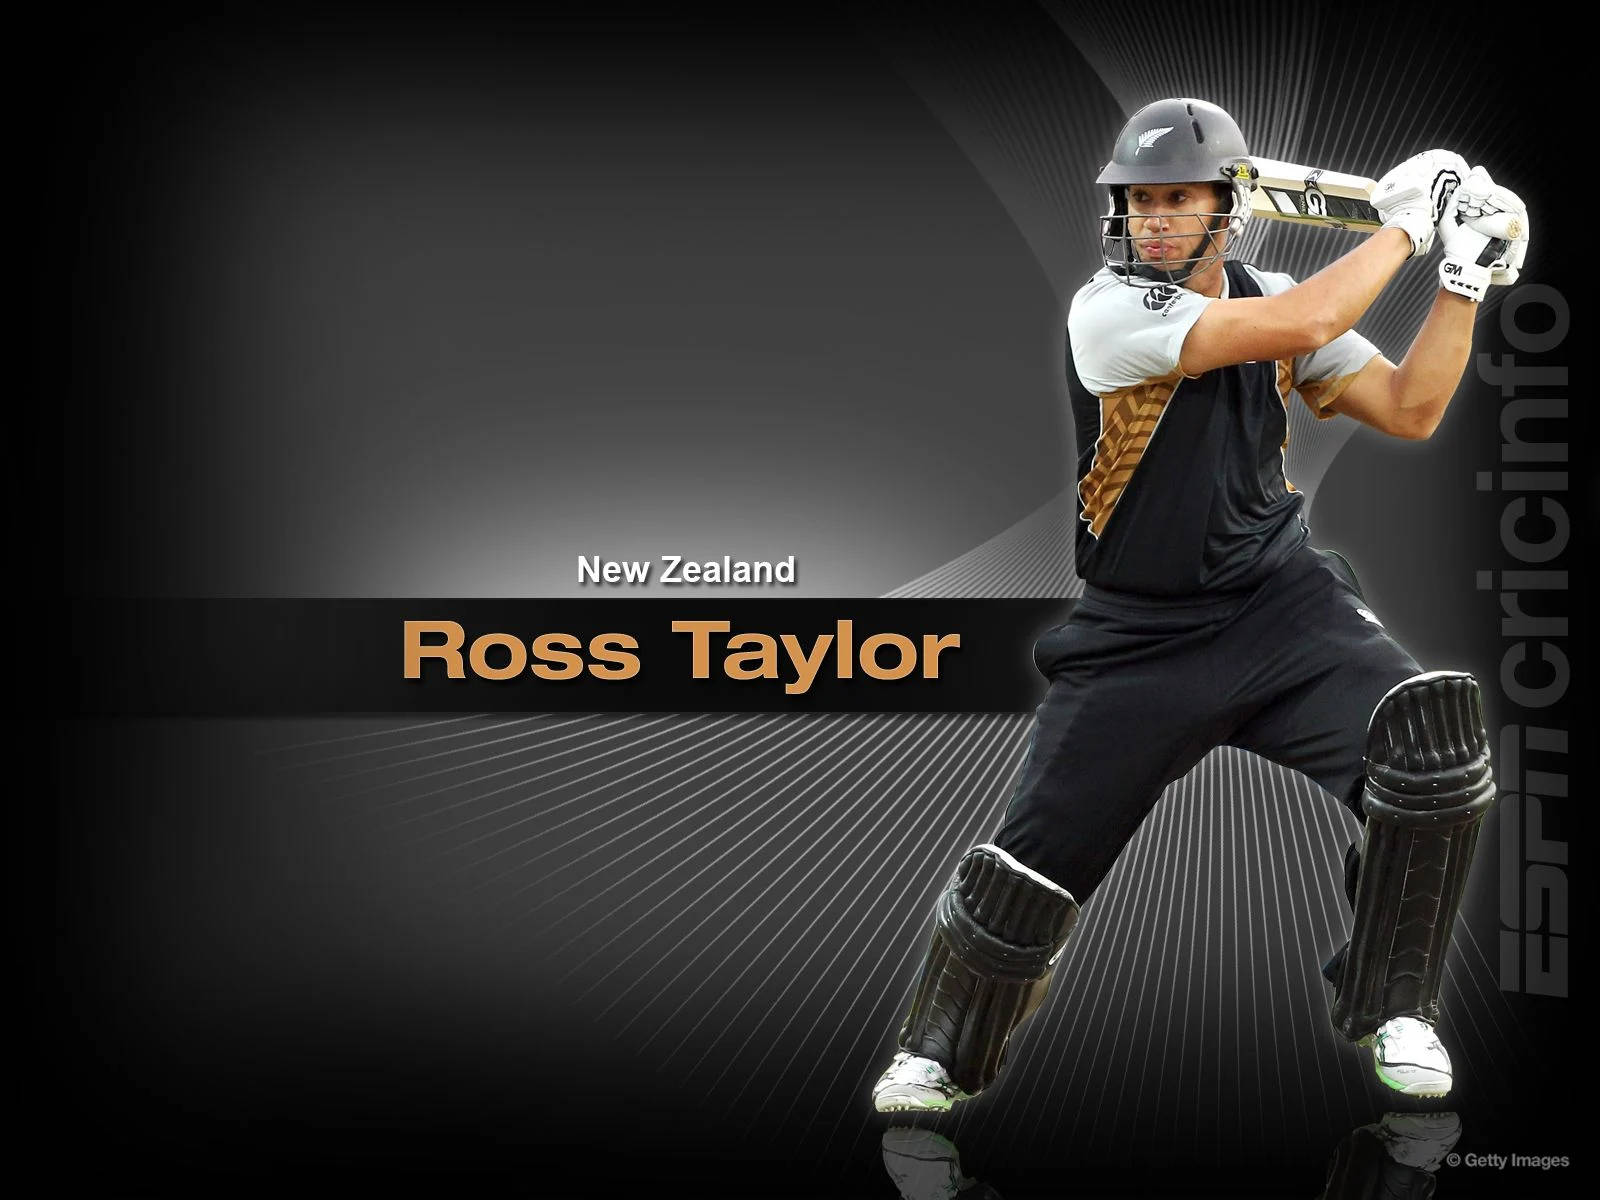 Ross Tailor Cricket Poster Background